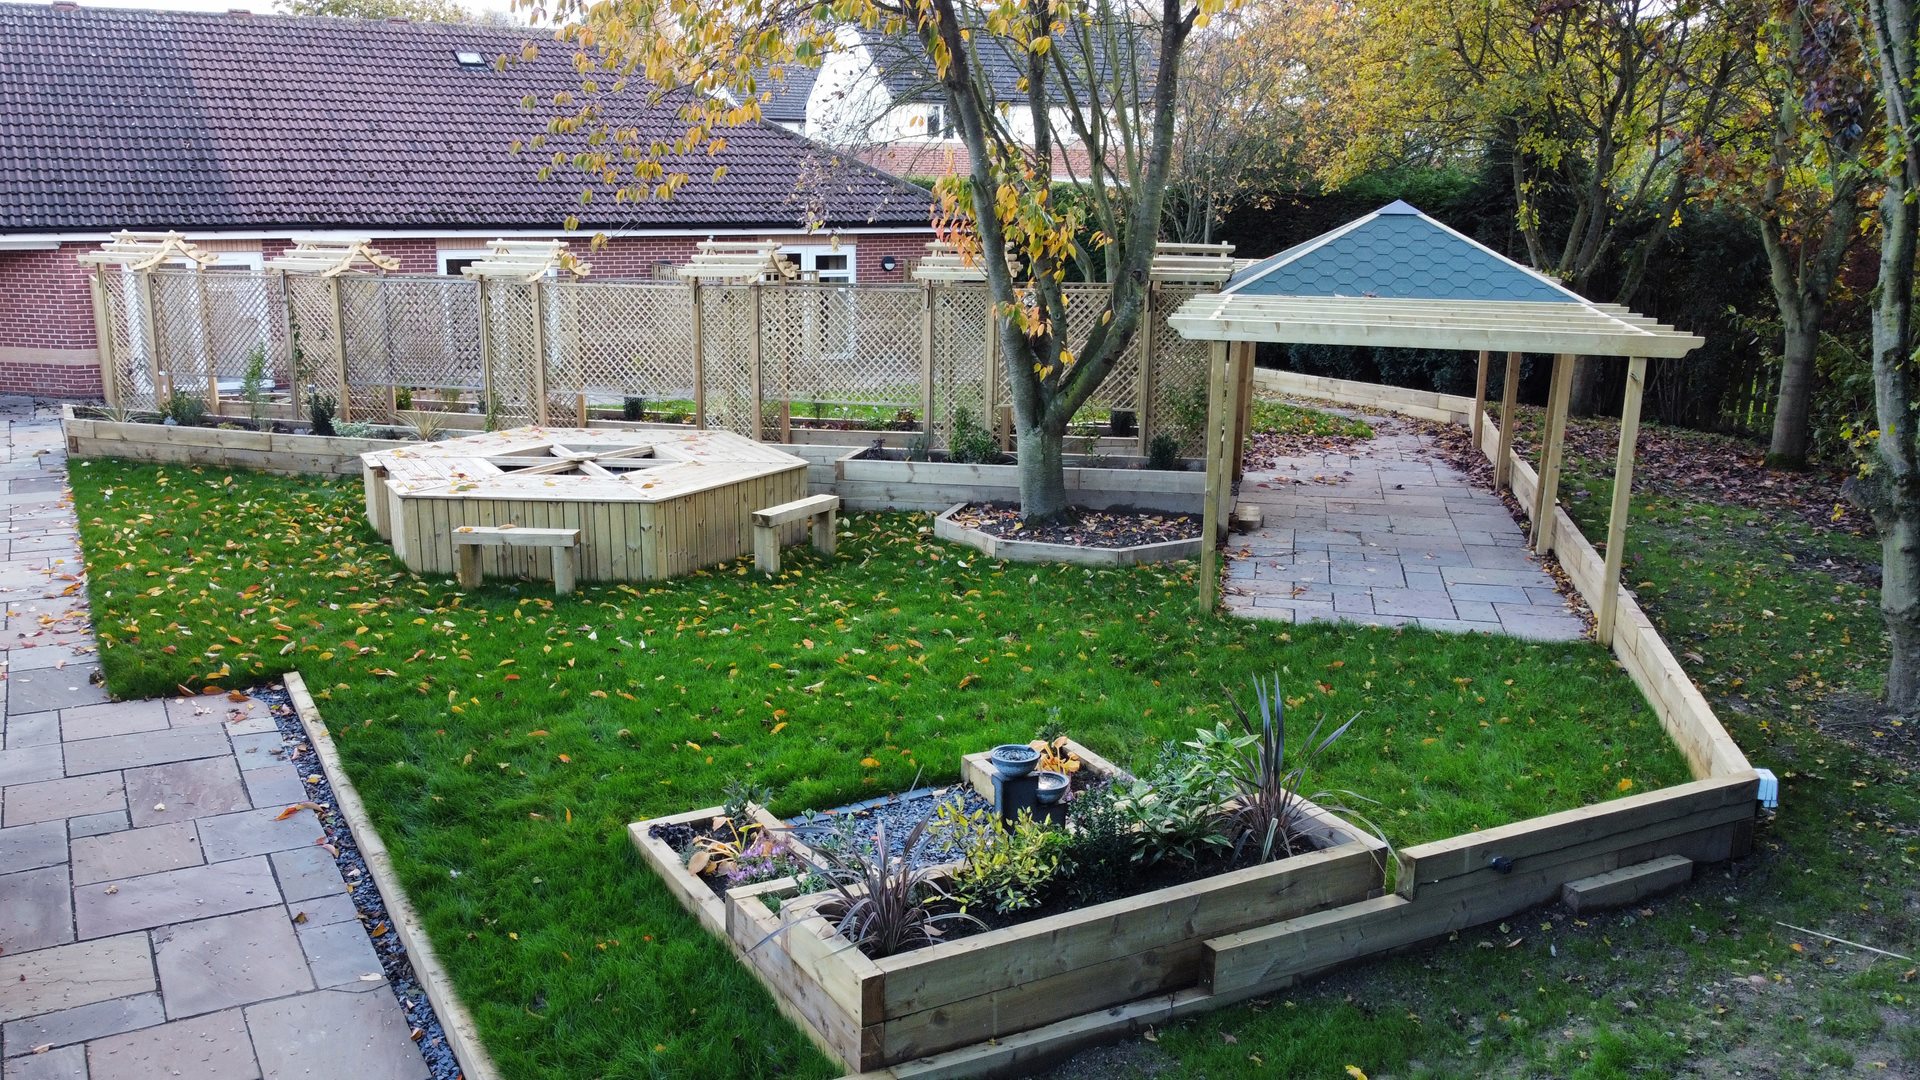 After phase 1 of the garden project